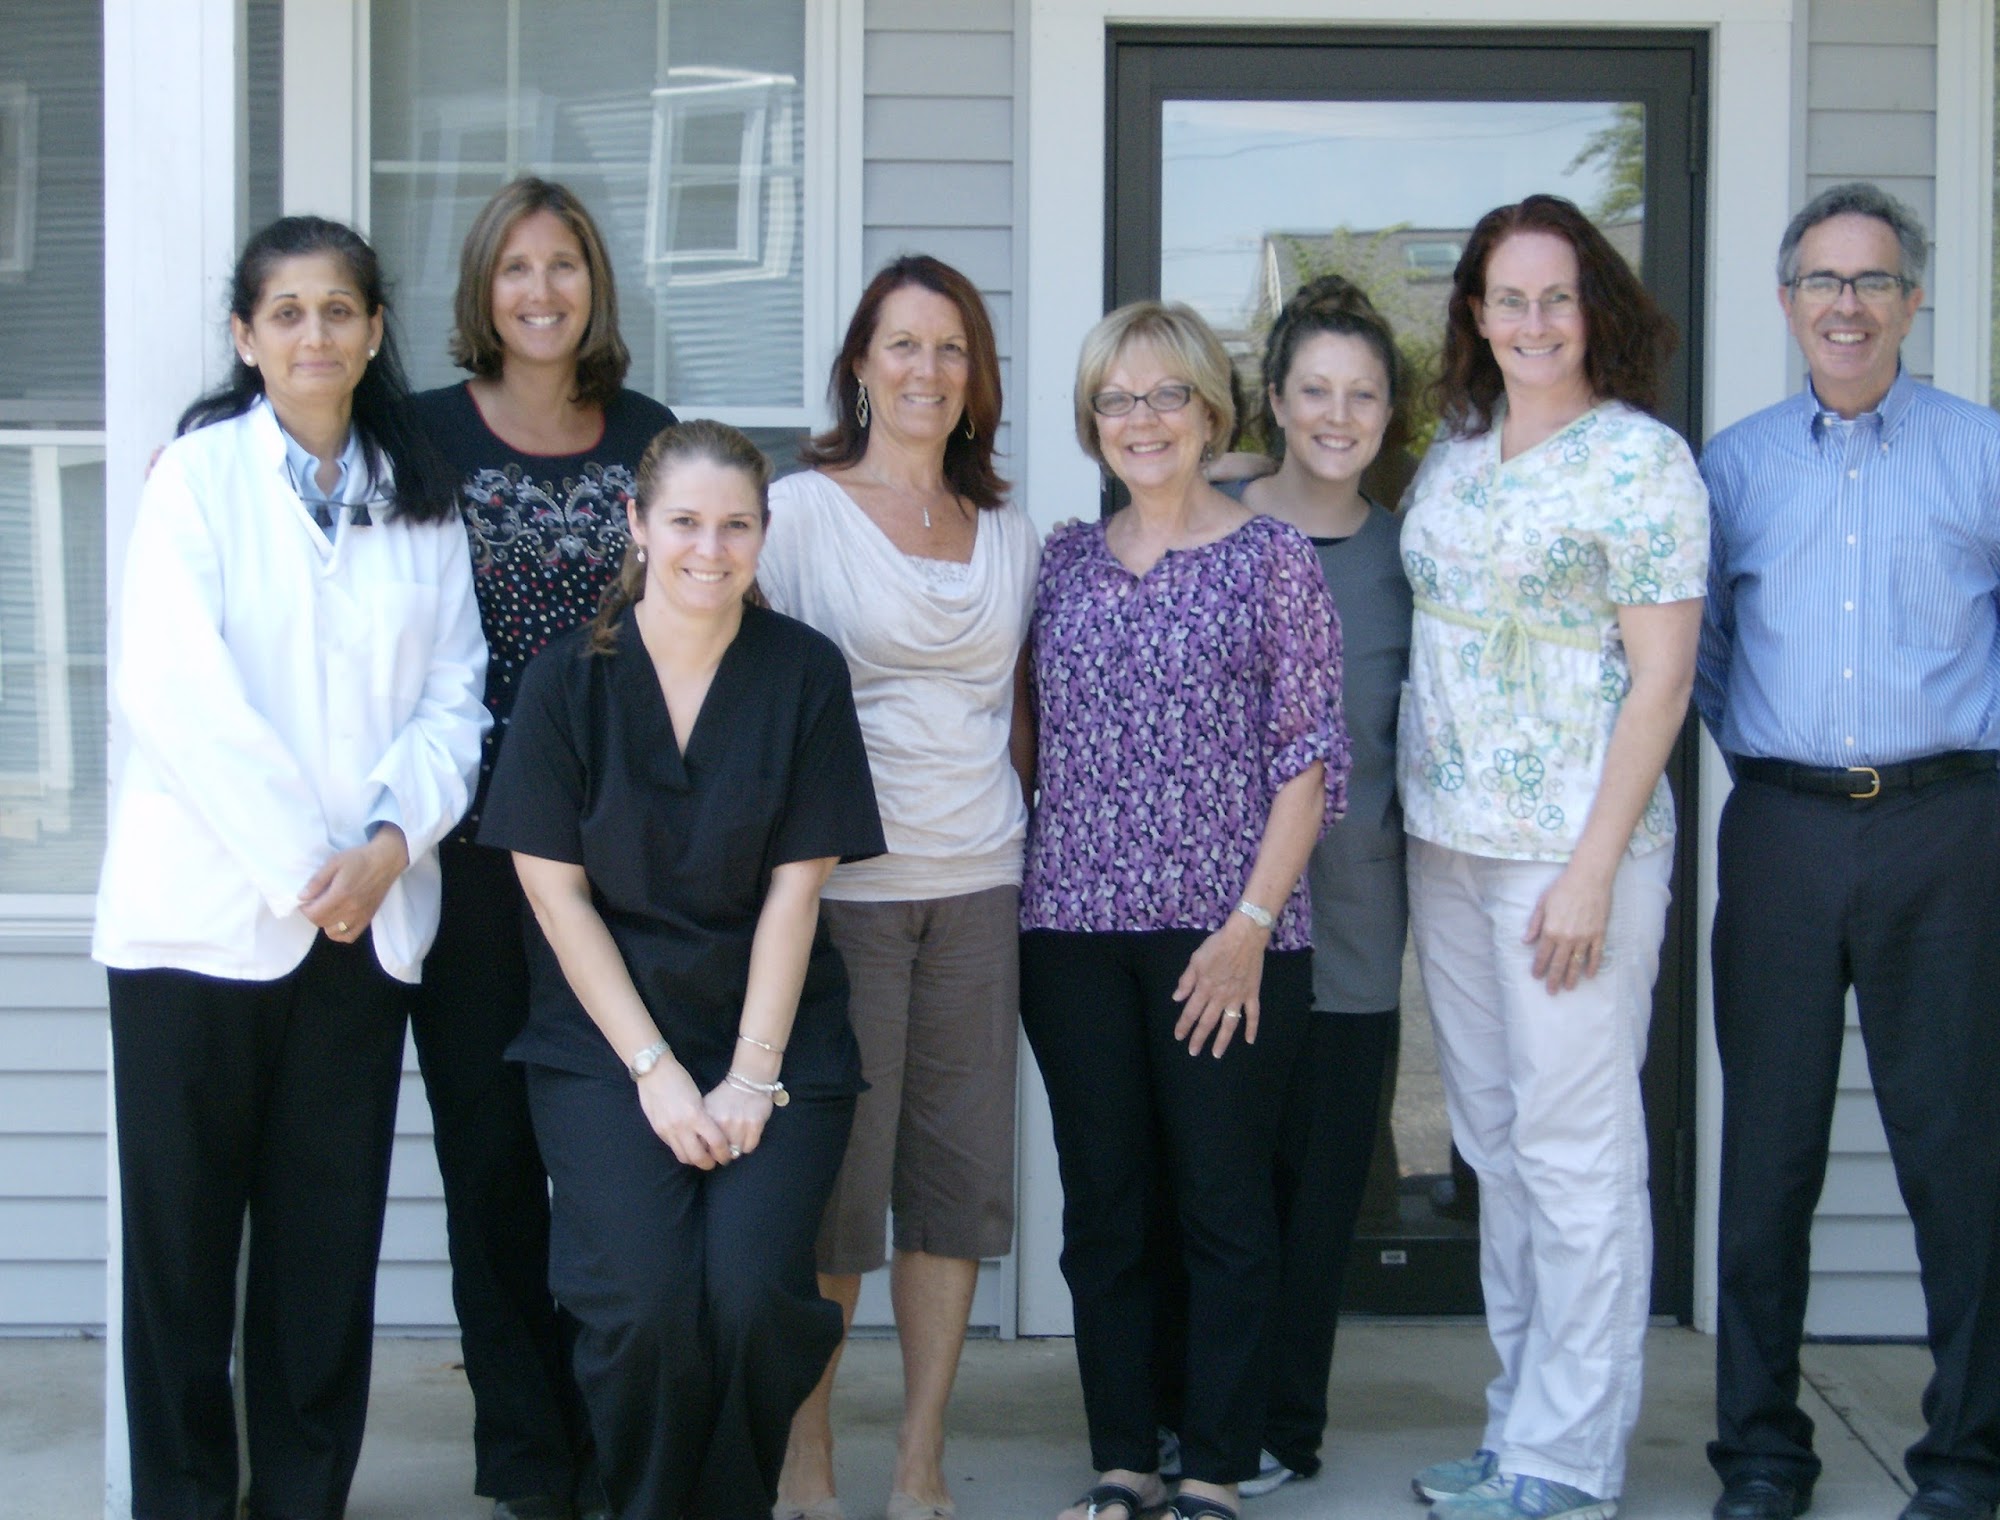 Dr. Mark Polasky Family and Cosmetic Dentistry